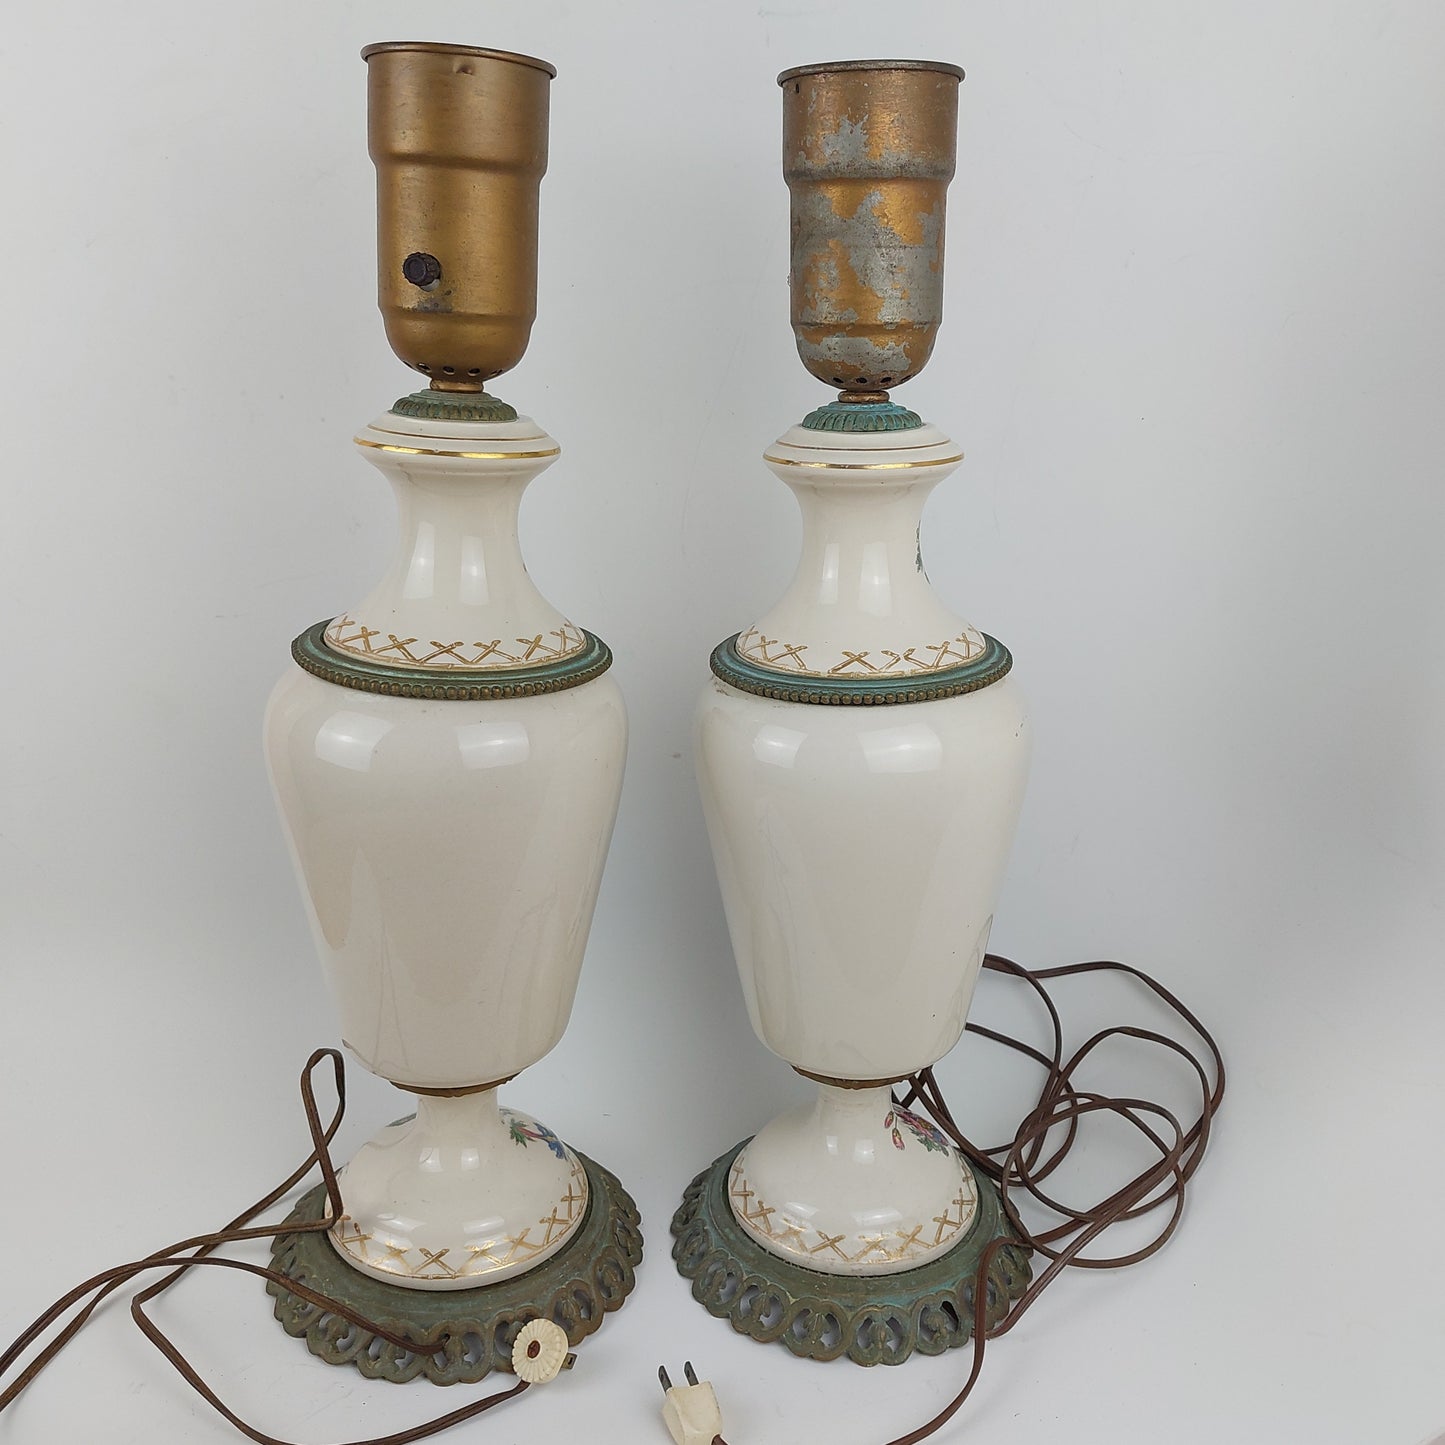 Vintage Pair of Paul Hanson Brass and Porcelain Hand Painted Lamps 519-A